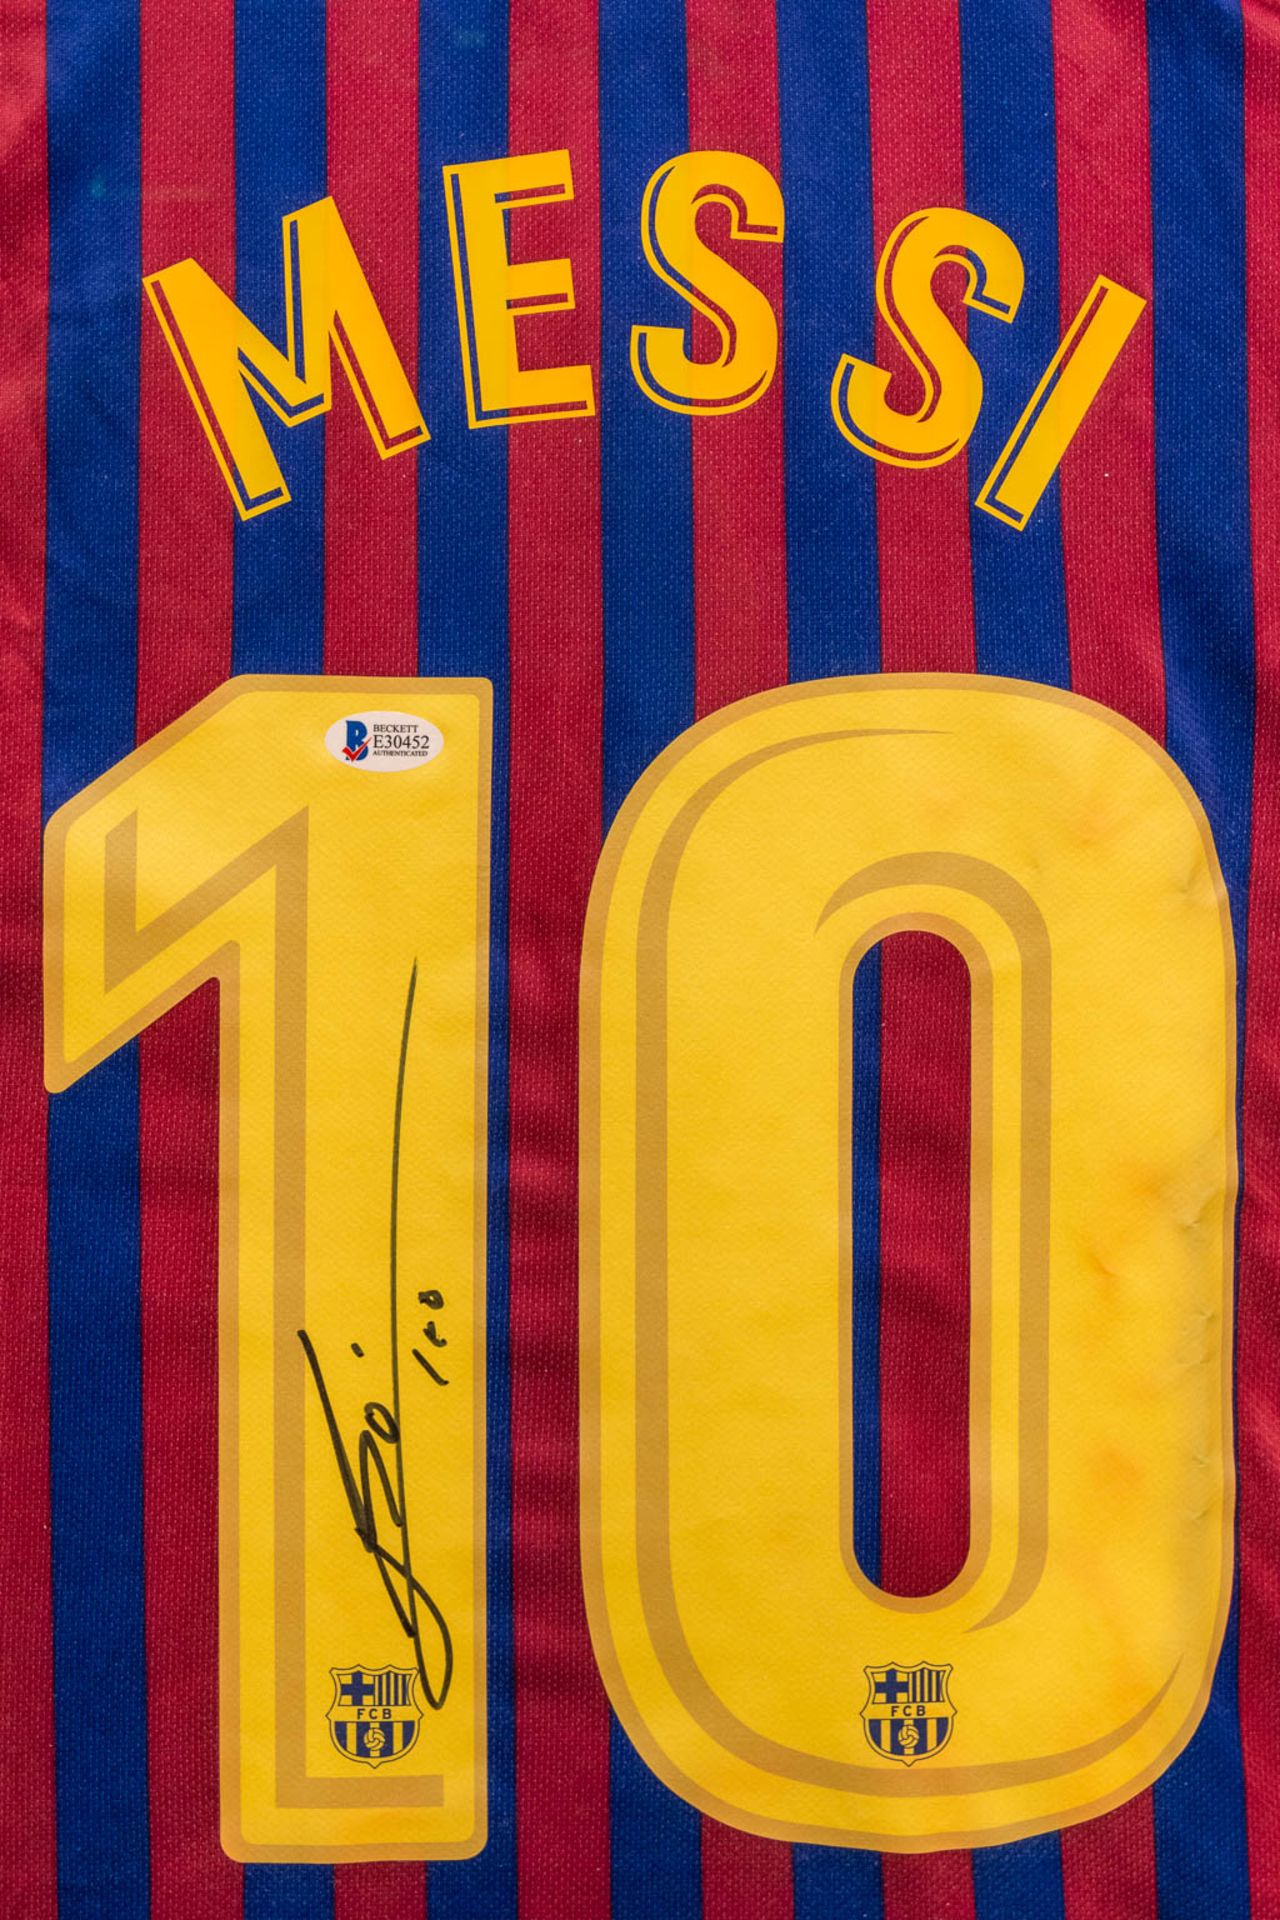 A soccer jersey of FC Barcelona with No 10 and signed by Lionel MESSI, framed. (77 x 75 cm) - Image 4 of 8